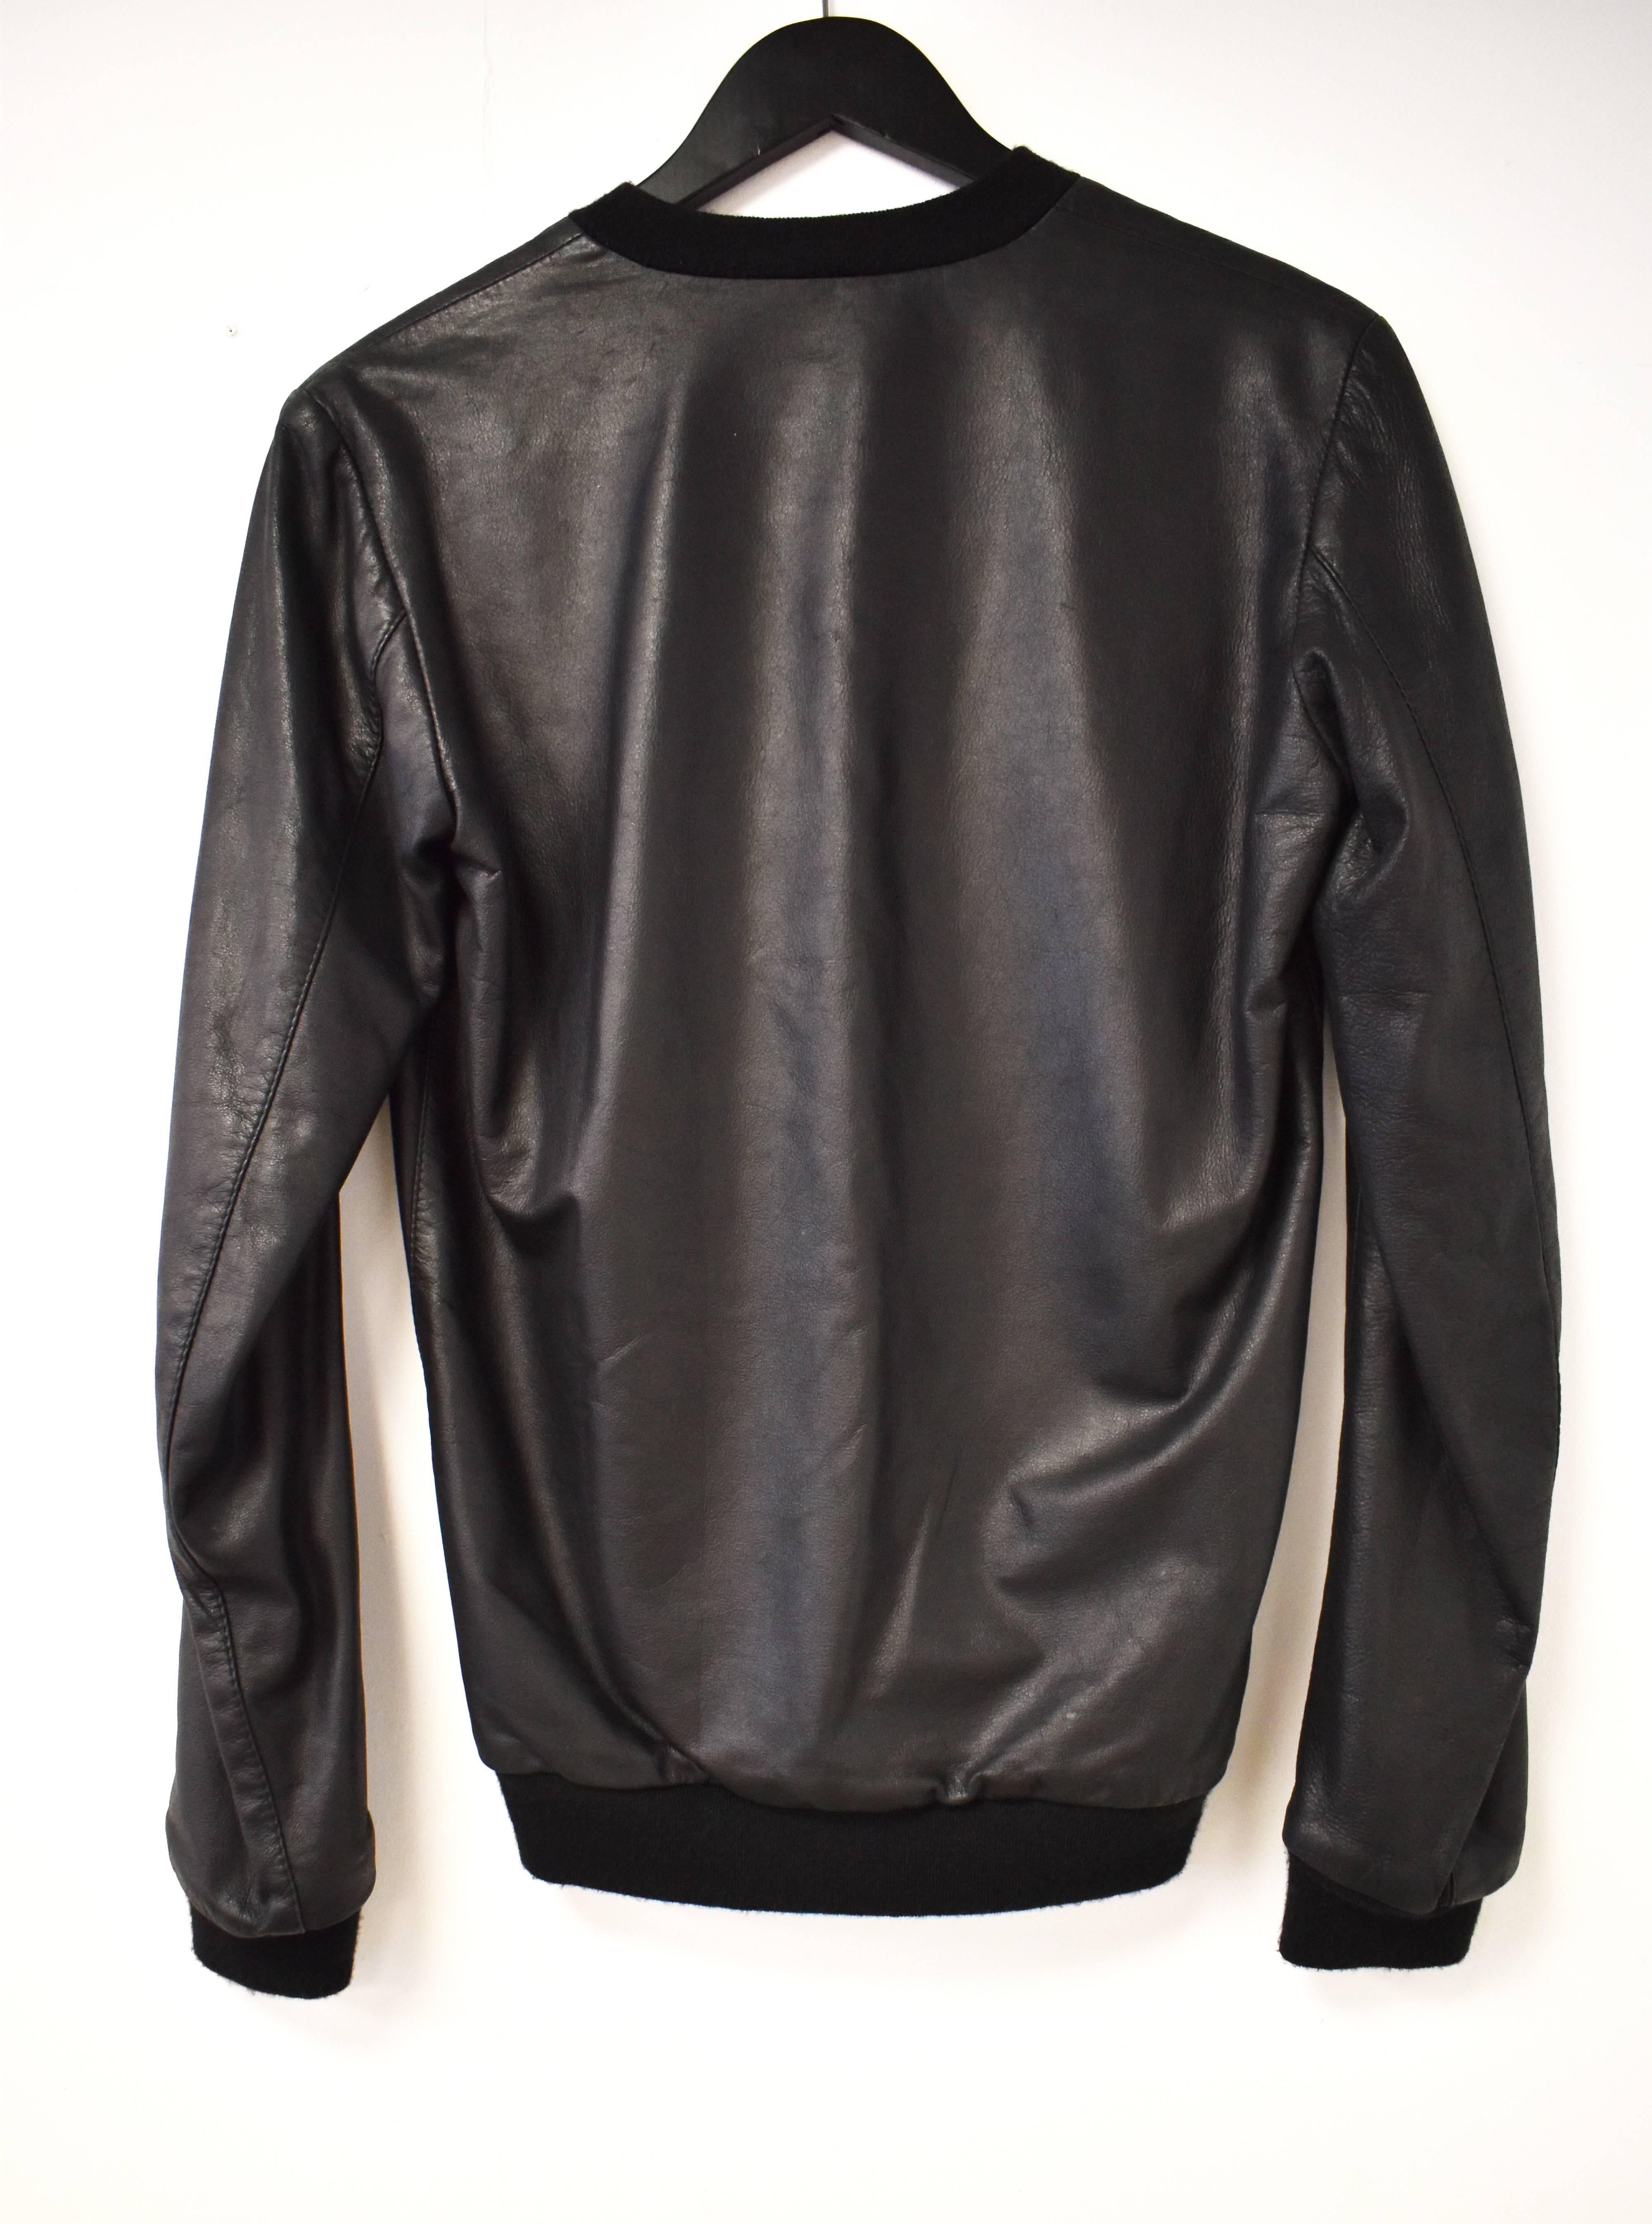 A leather Raf Simons sweater-style leather top. The top has a stitched and applique diamond design on the front with threaded leather straps mimicking the design of a knitted sweater. The top is long sleeved and made of 100% leather with a silk